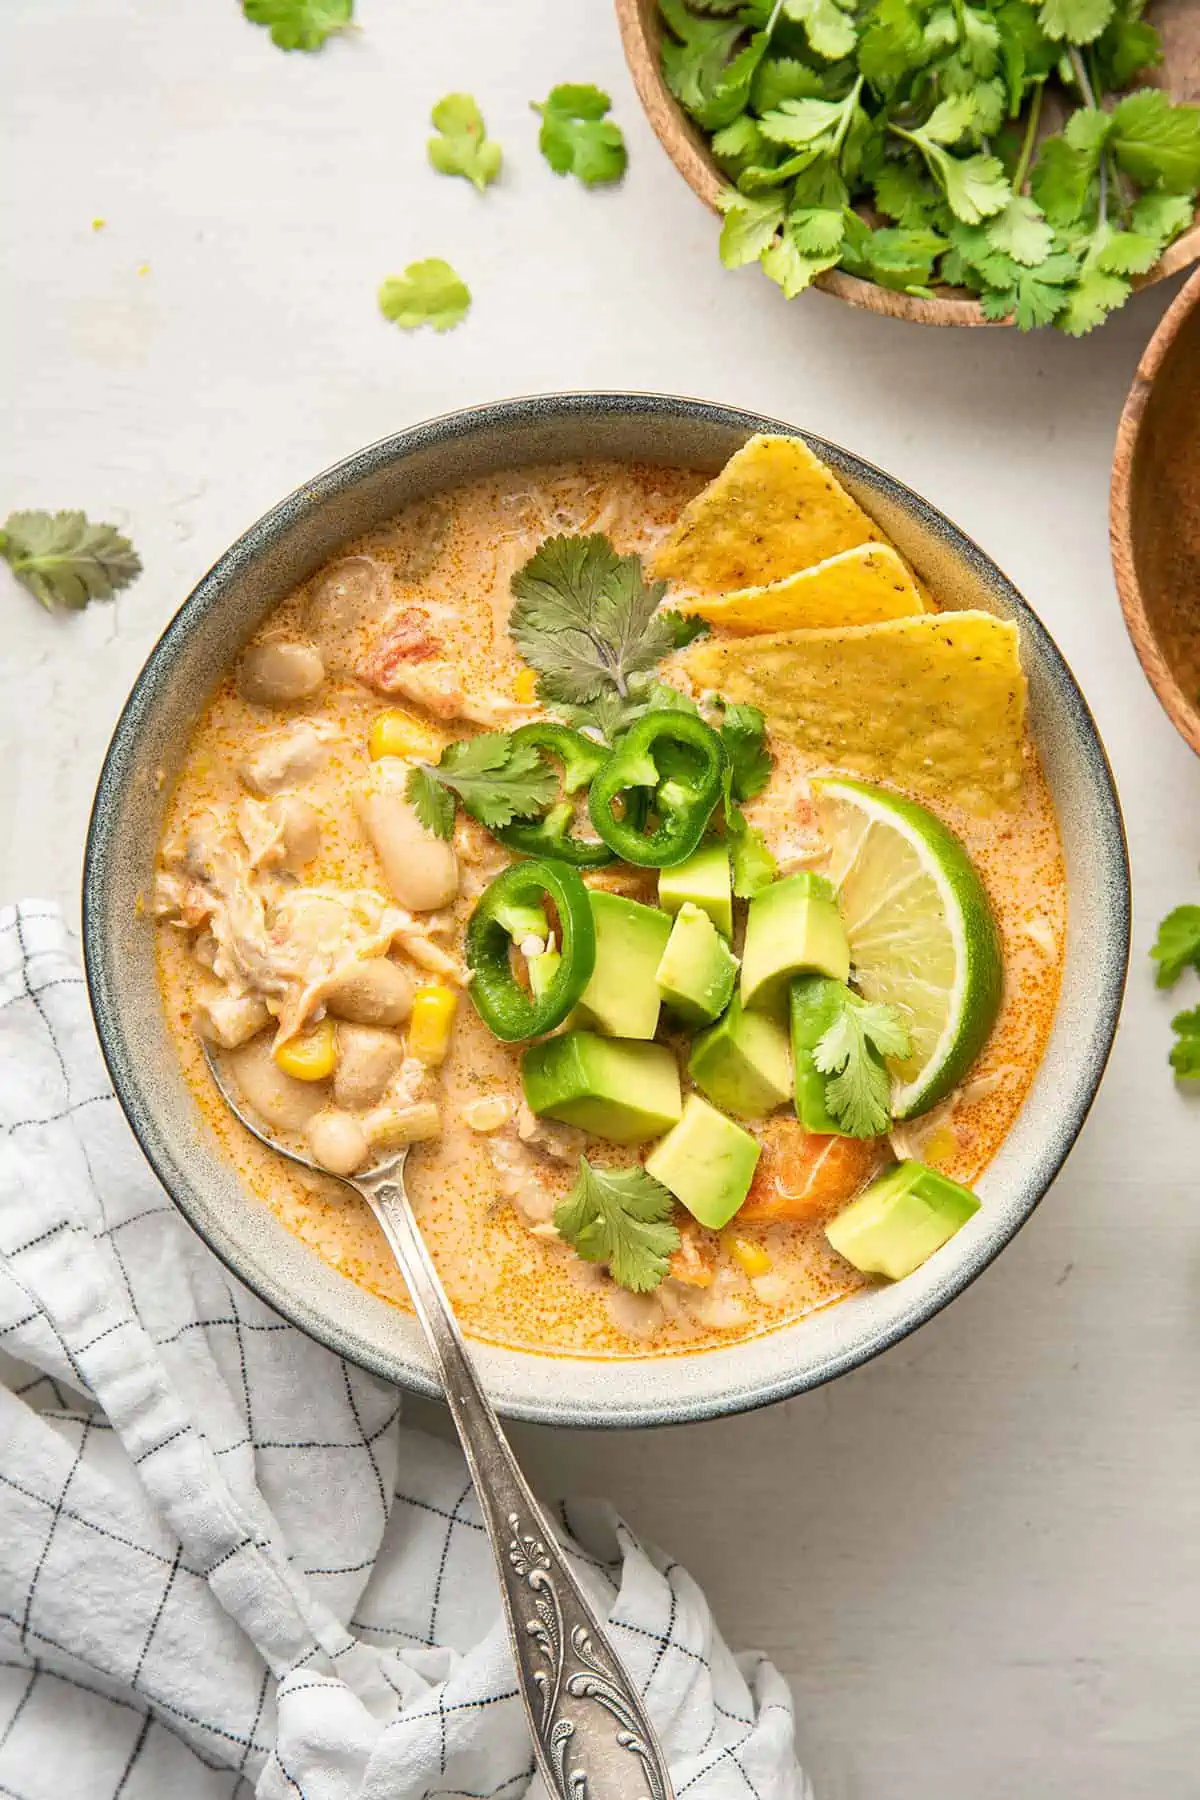 Overhead view of a bowl of white chicken chili topped with chilis, lime, avocado, cilantro, and tortilla chips, with a bowl of cilantro in the back